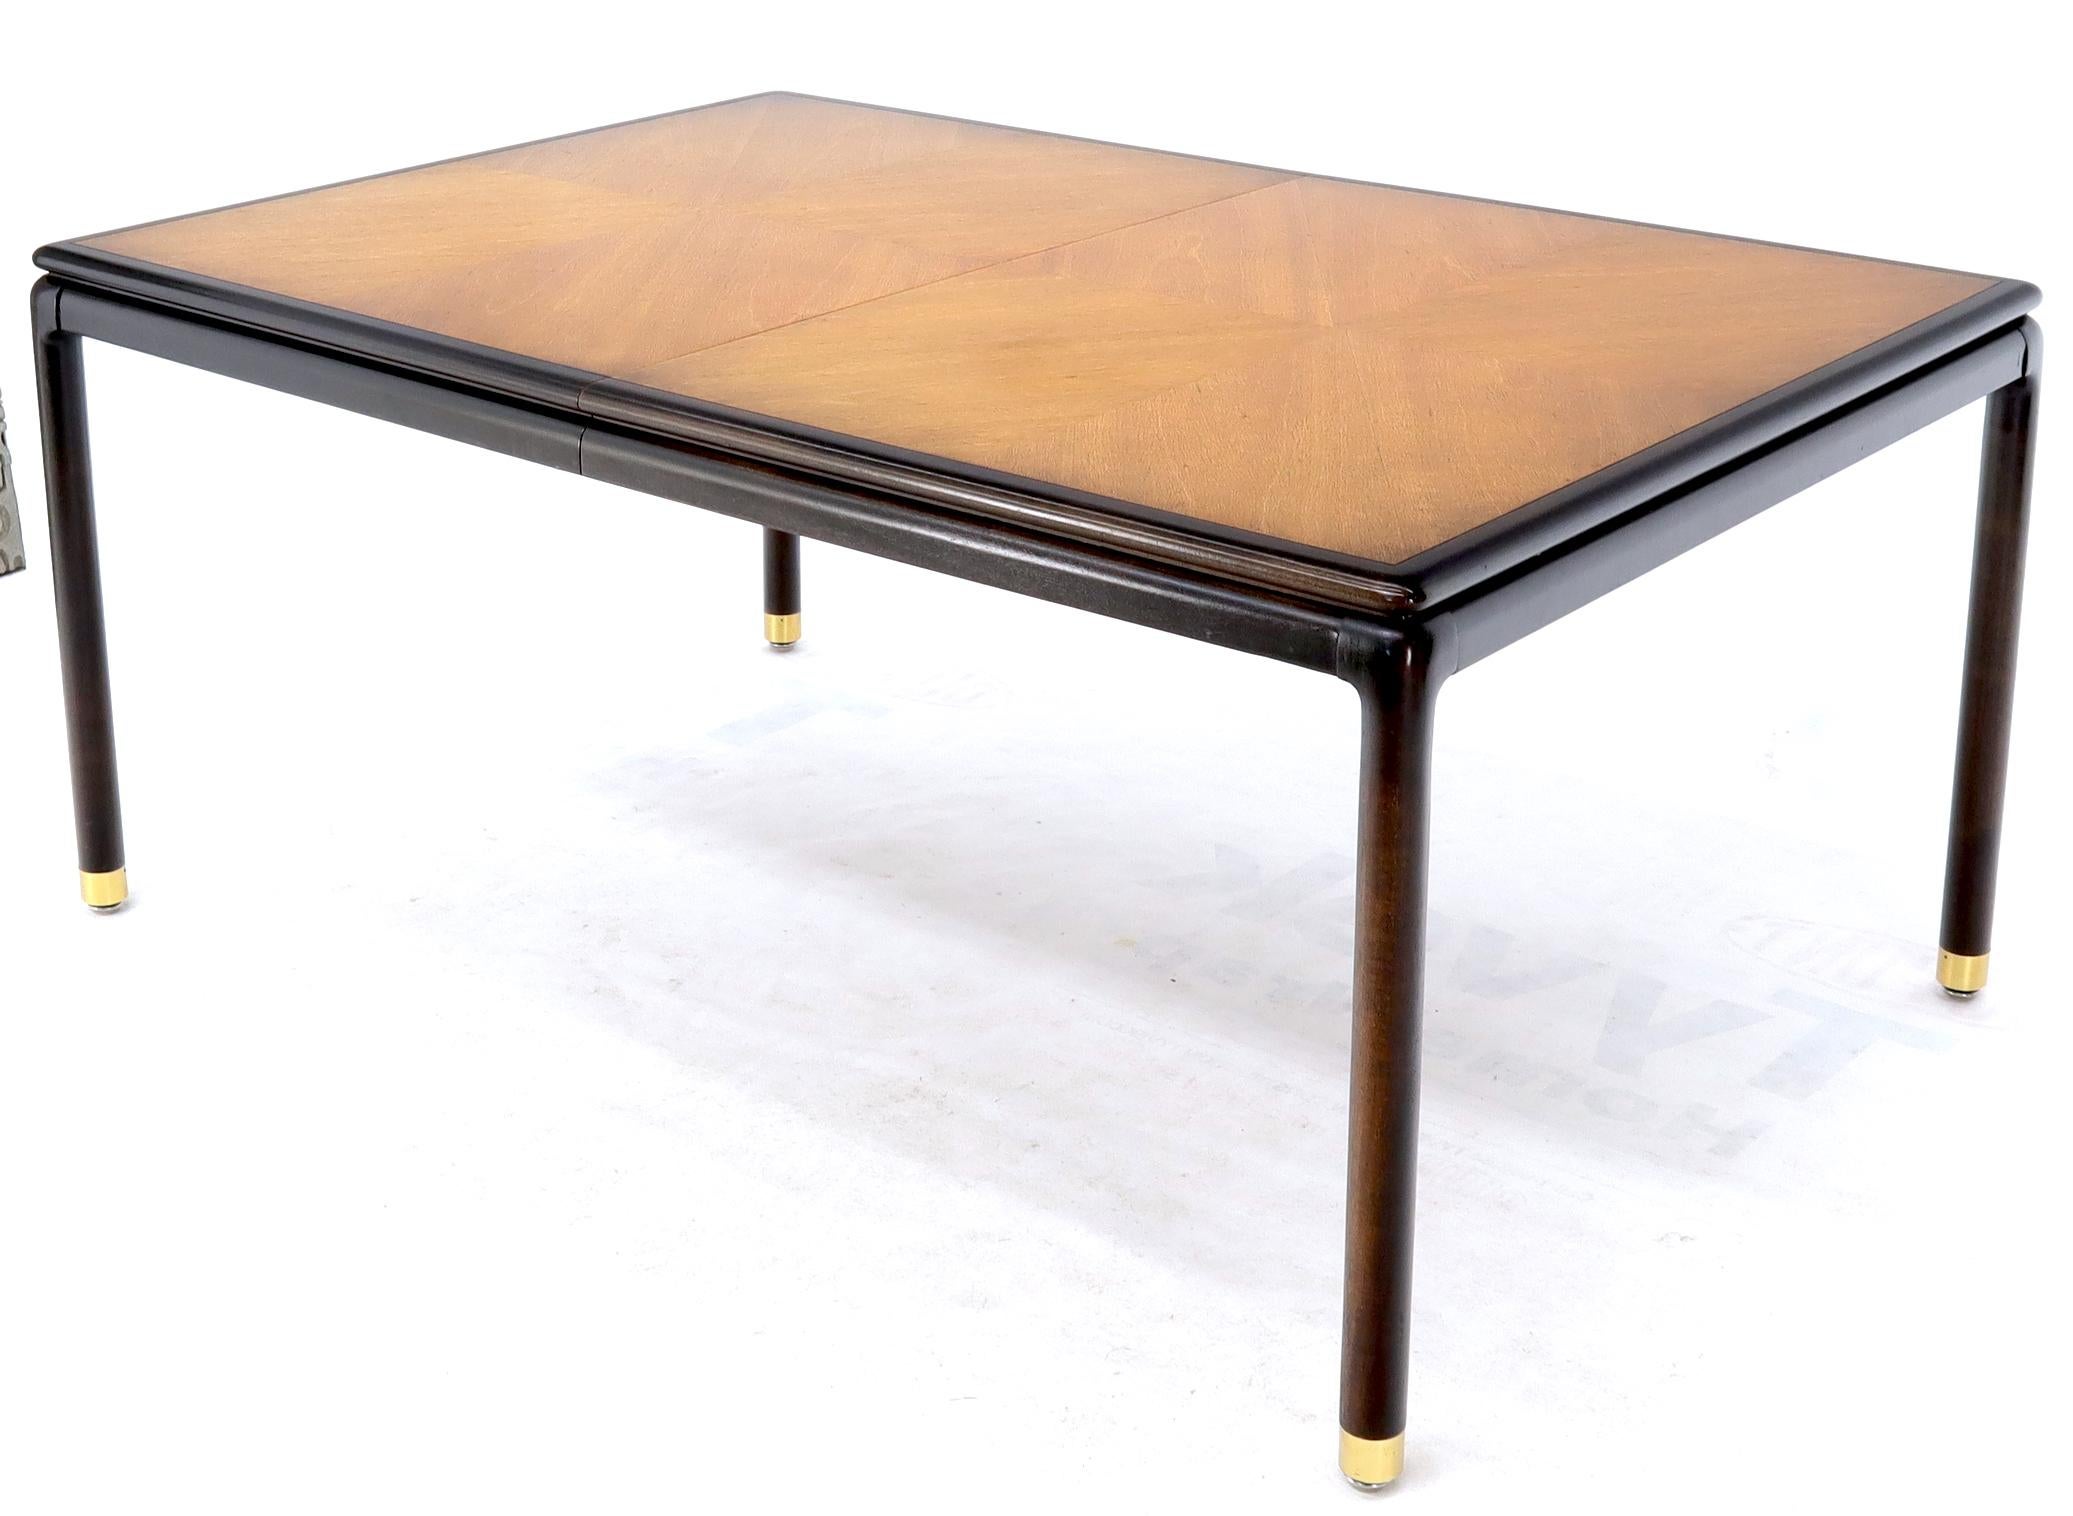 Danish Mid-Century Modern Large Two-Tone Dining Room Table with 2 Leaves For Sale 1